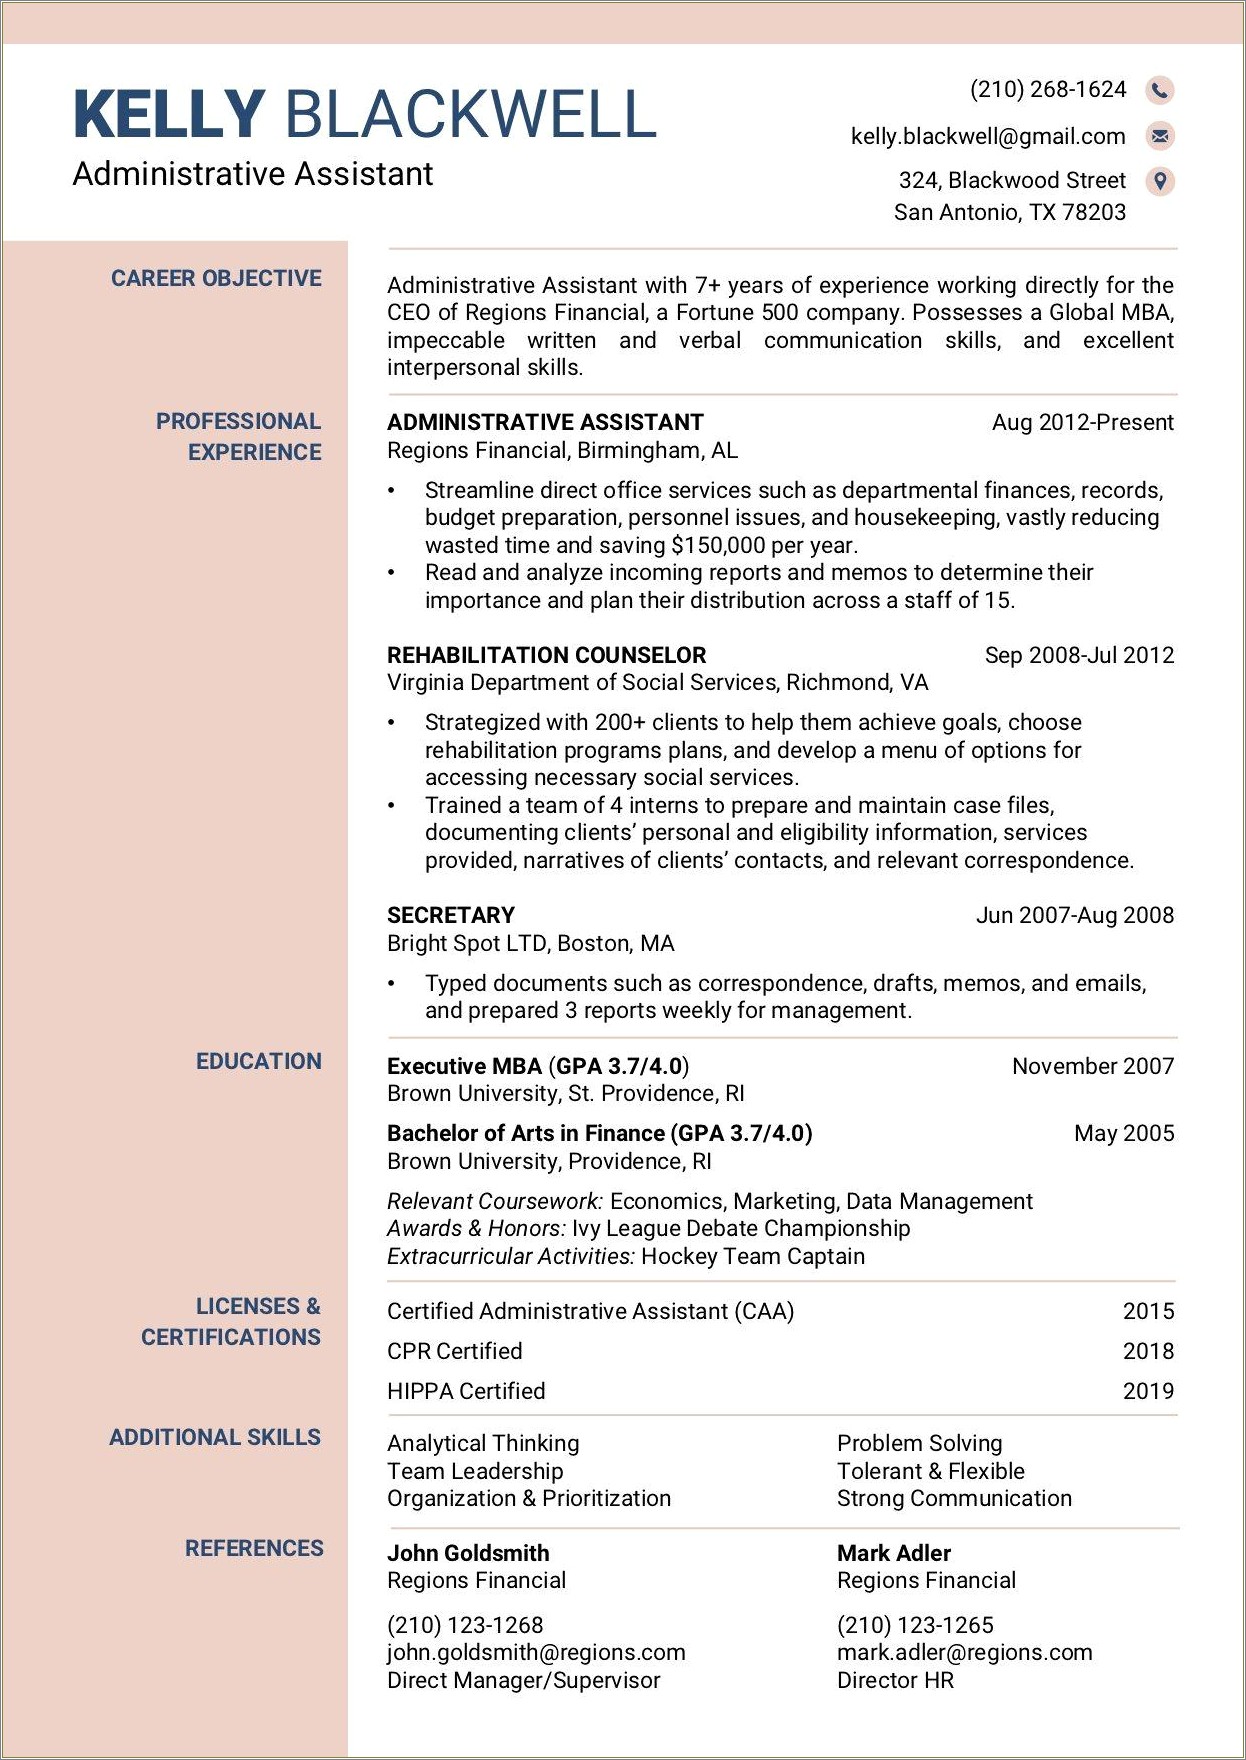 Resume Examples For Great Communication Skills